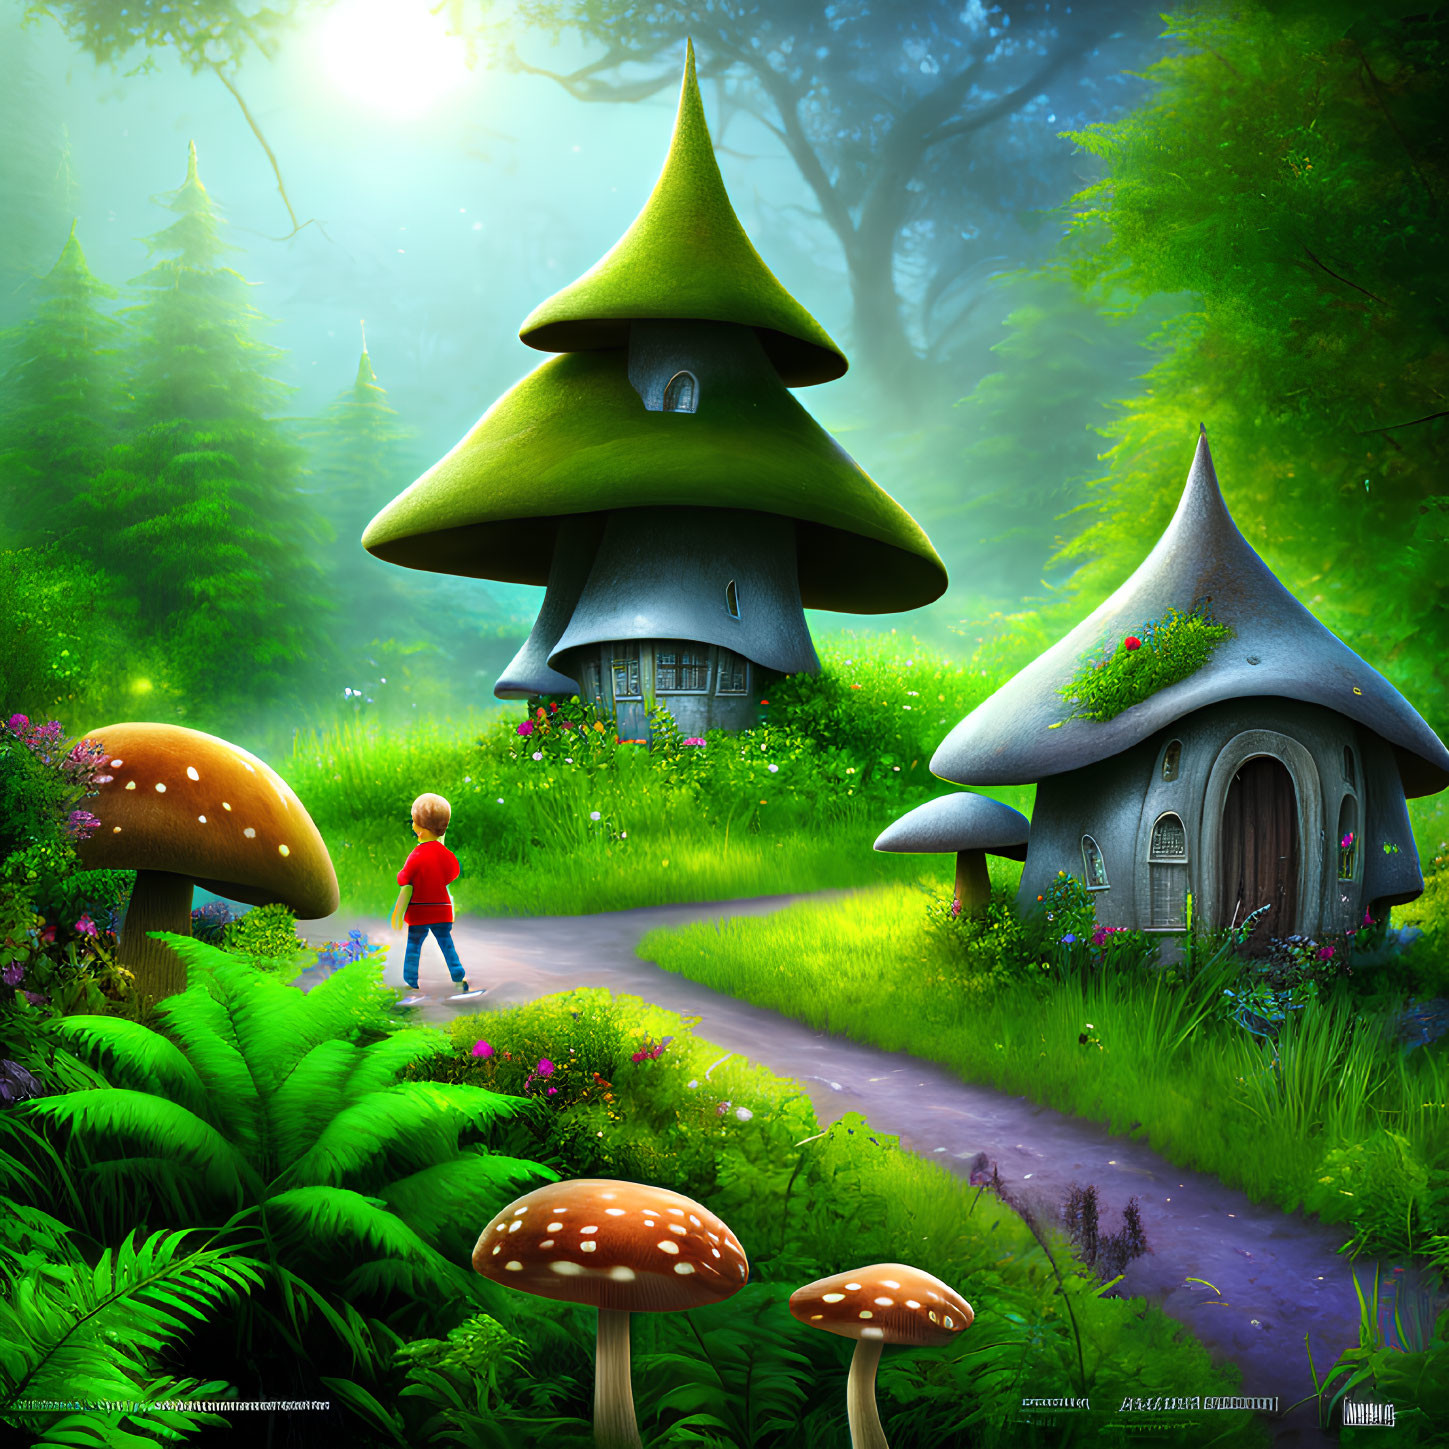 Child walking in enchanted forest with mushroom houses under sunlit canopy